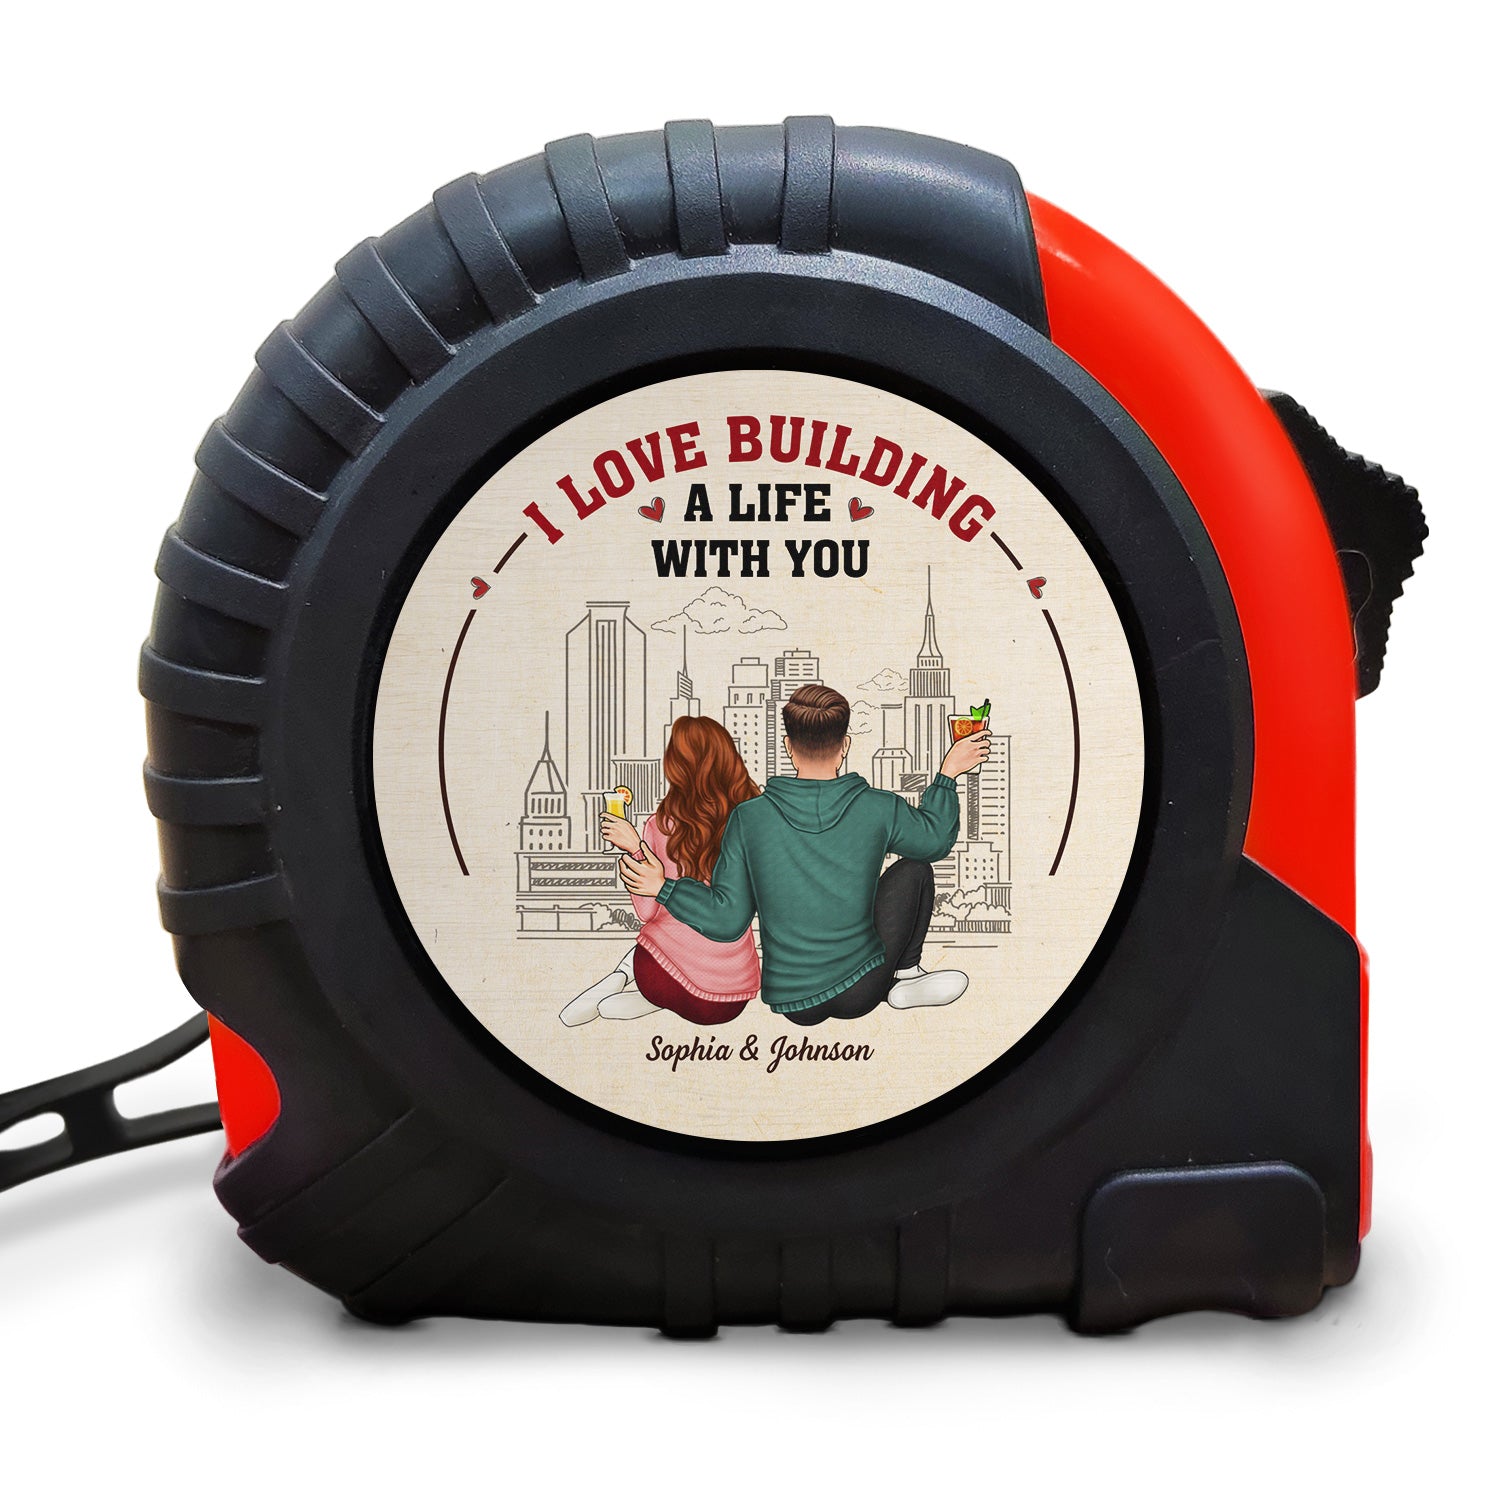 I Love Building A Life With You - Gift For Couples, Spouse, Husband, Boyfriend - Personalized Tape Measure